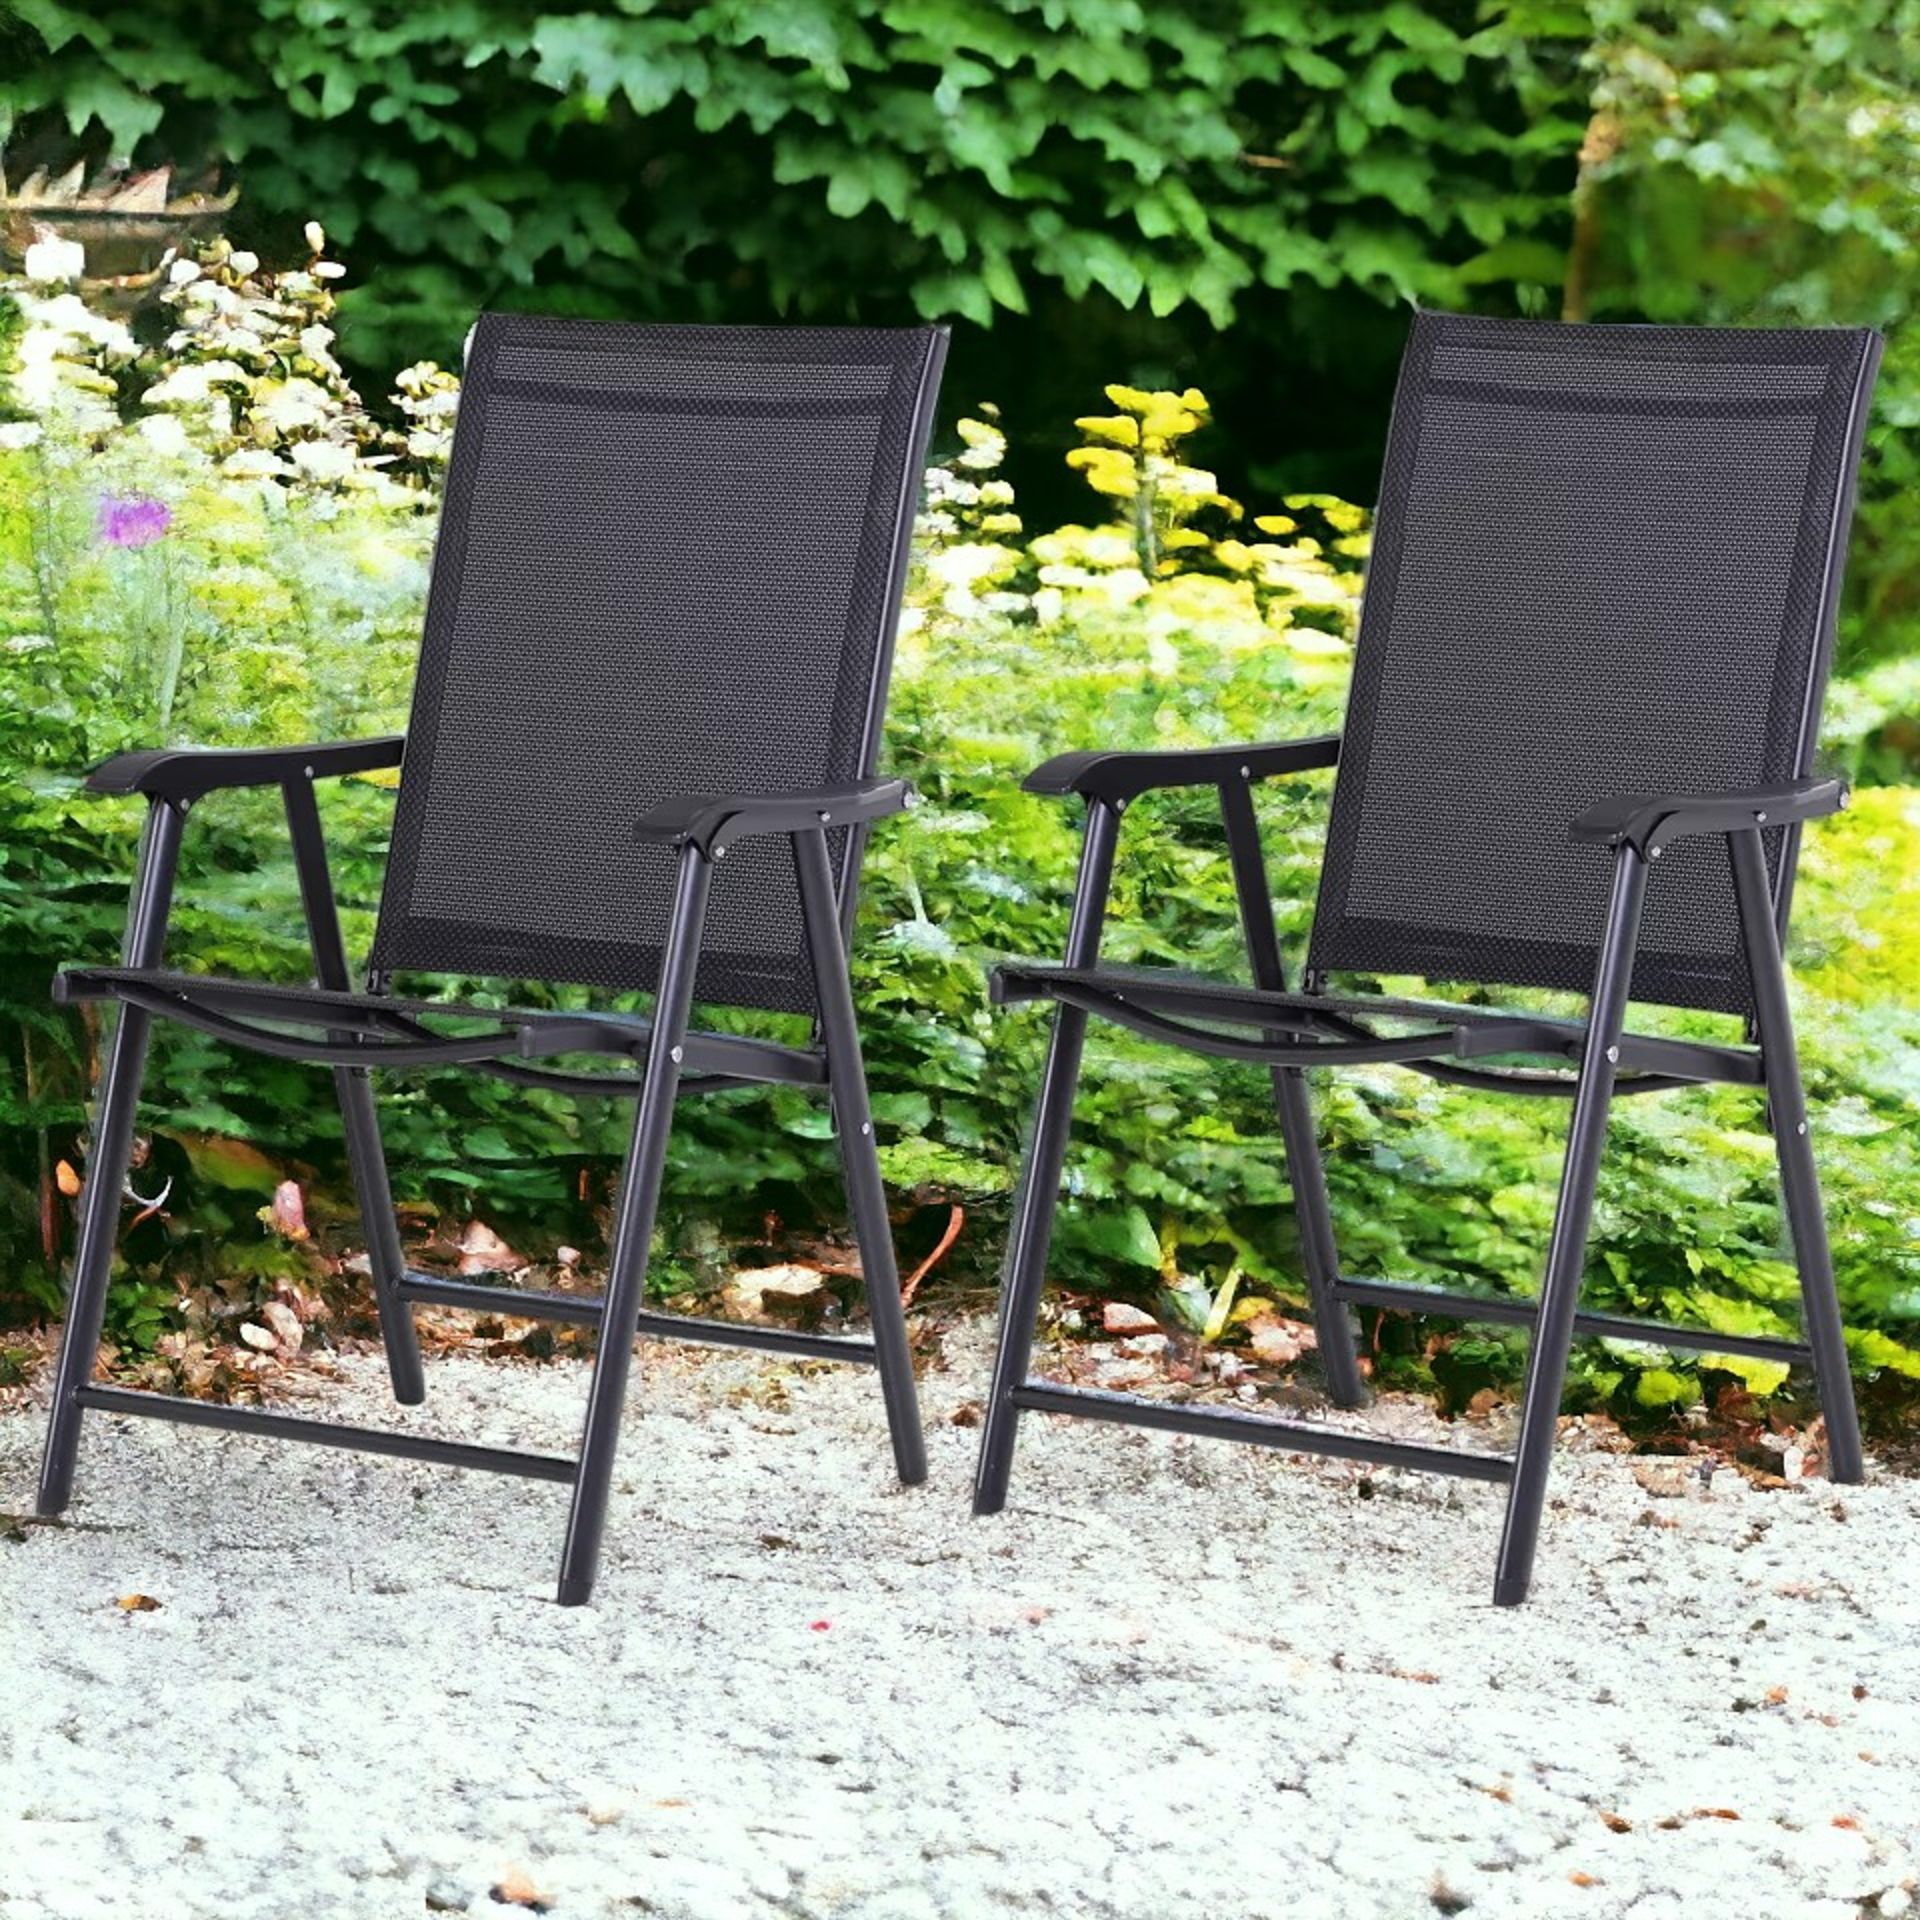 FREE DELIVERY- BRAND NEW 2-PCS GARDEN ARMCHAIRS OUTDOOR PATIO FOLDING MODERN FURNITURE BLACK - Image 2 of 2